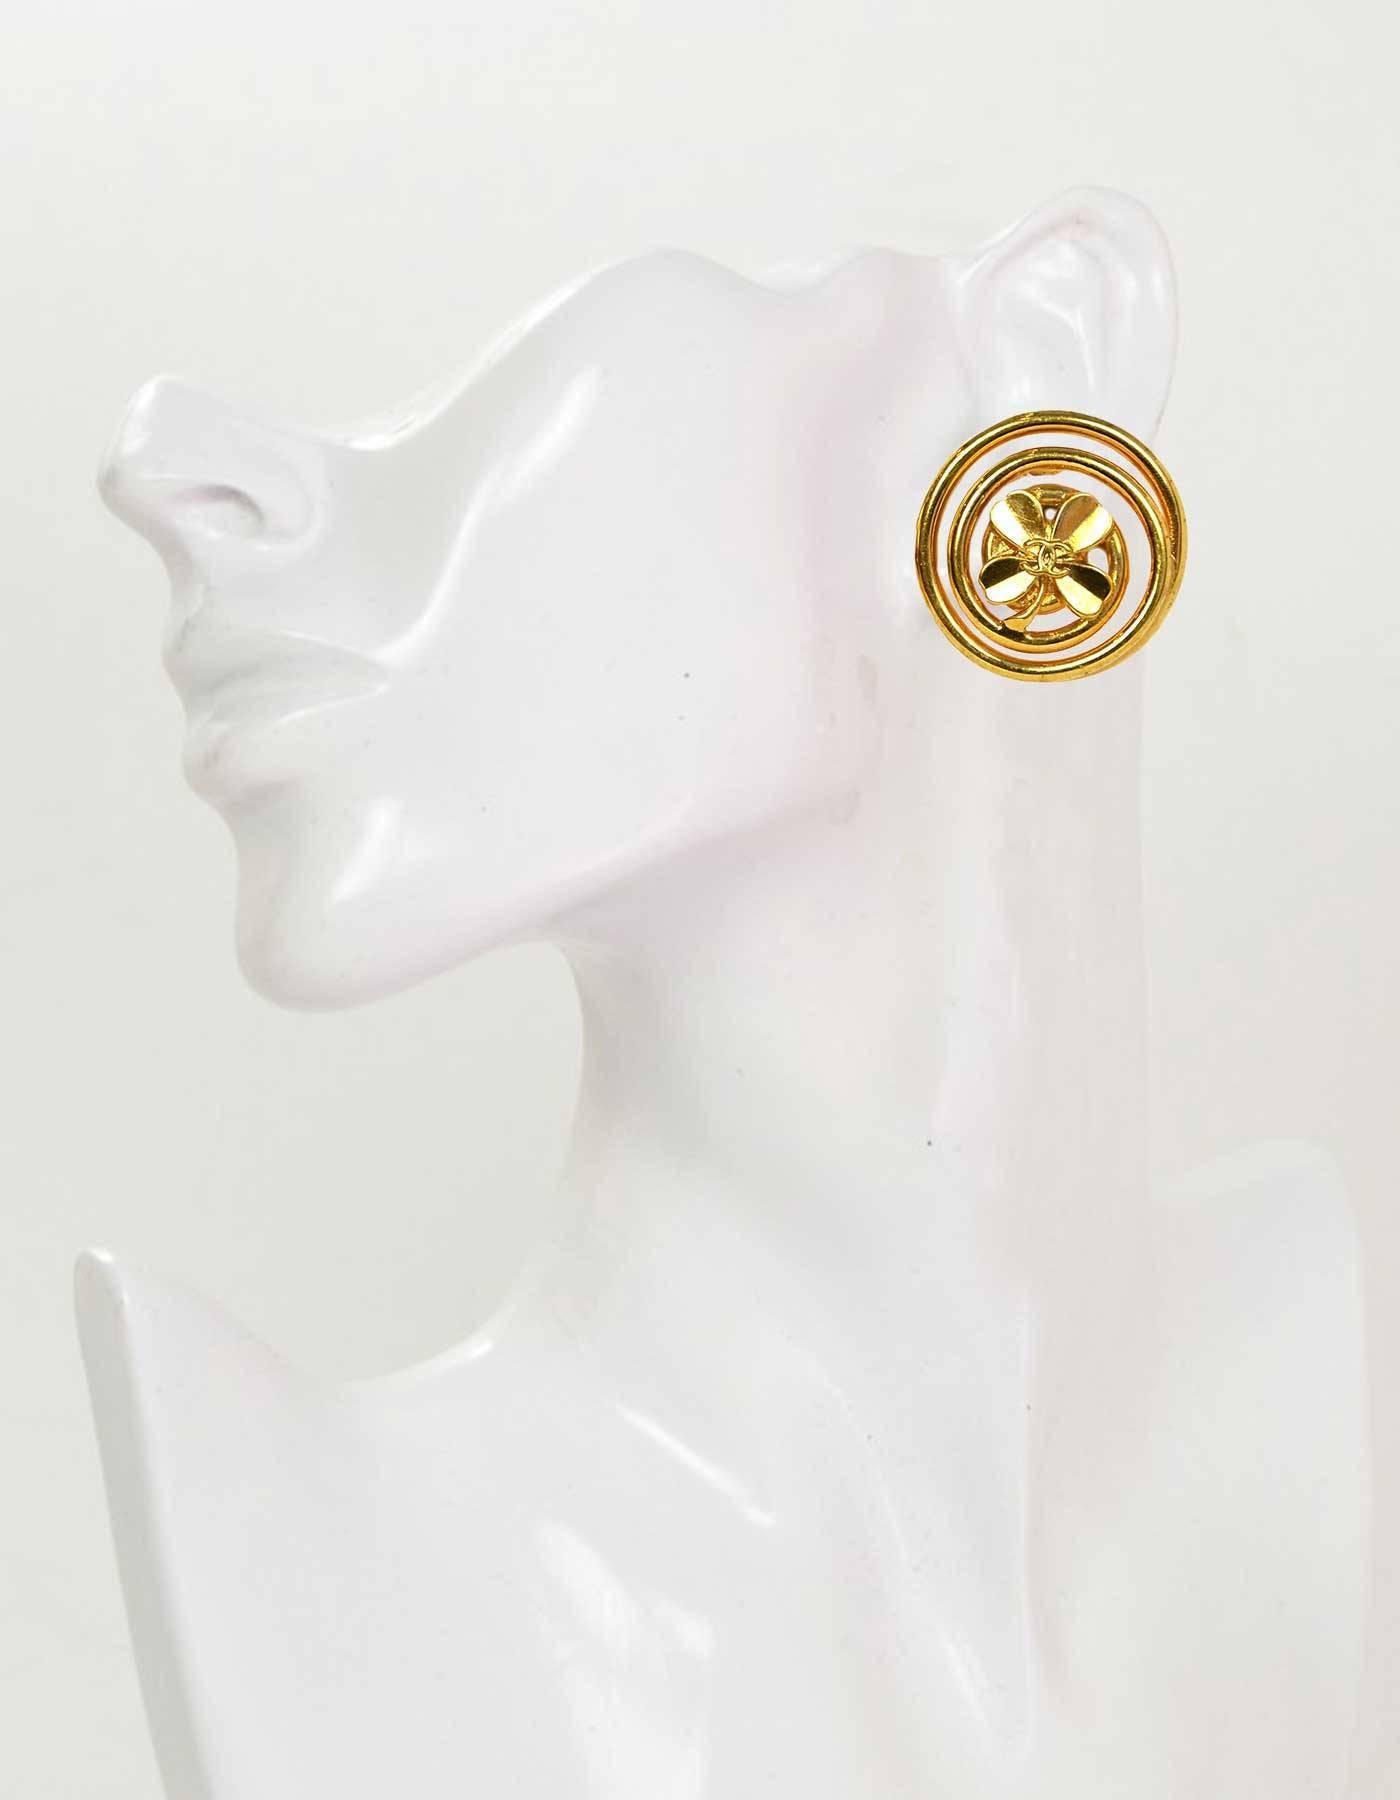 CHANEL Vintage '93 Extra Large Swirl Clip On Earrings 1